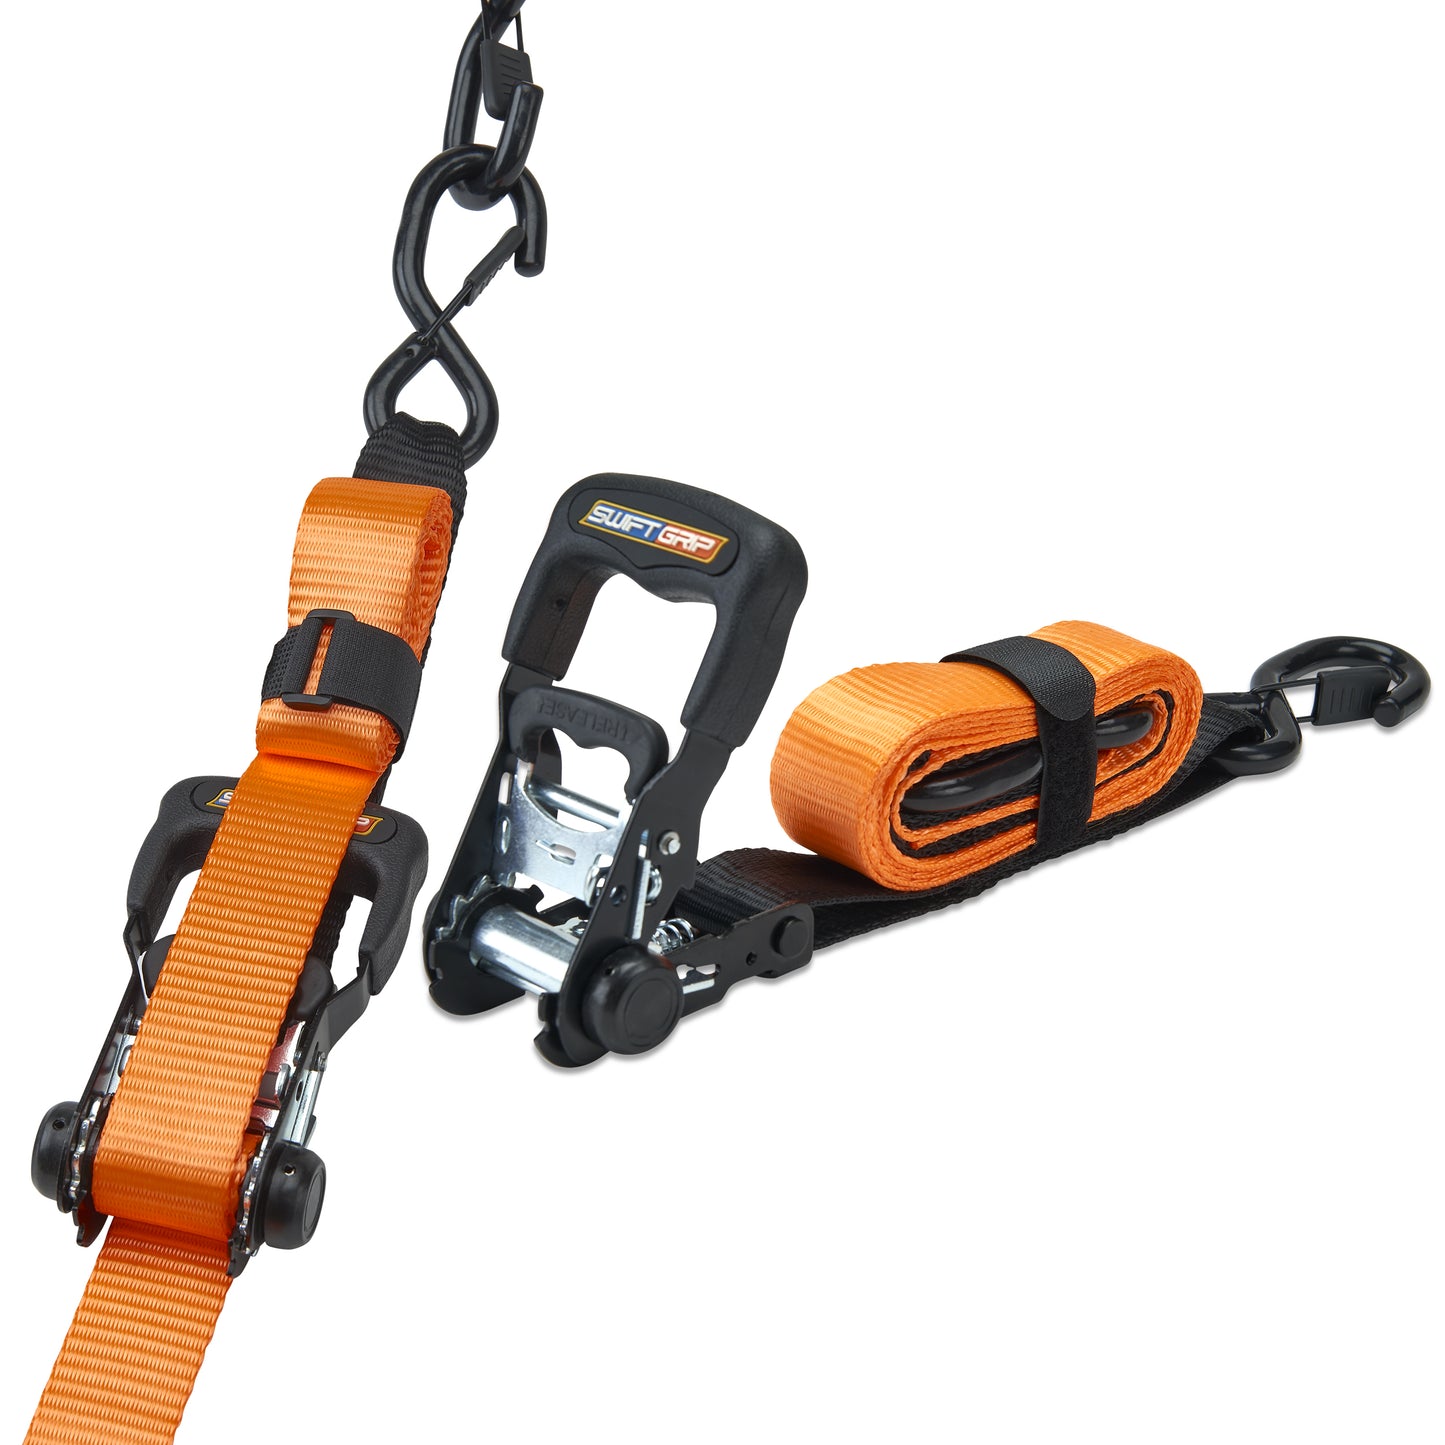 Ratchet Straps Heavy Duty Tie Downs, (4) Heavy Duty Ratchet Strap with Integrated Soft Tie Hook, UTV Tie Down Straps, Motorcycle Tie Down Straps, Padded Handles & Coated Chromoly Hooks, RED